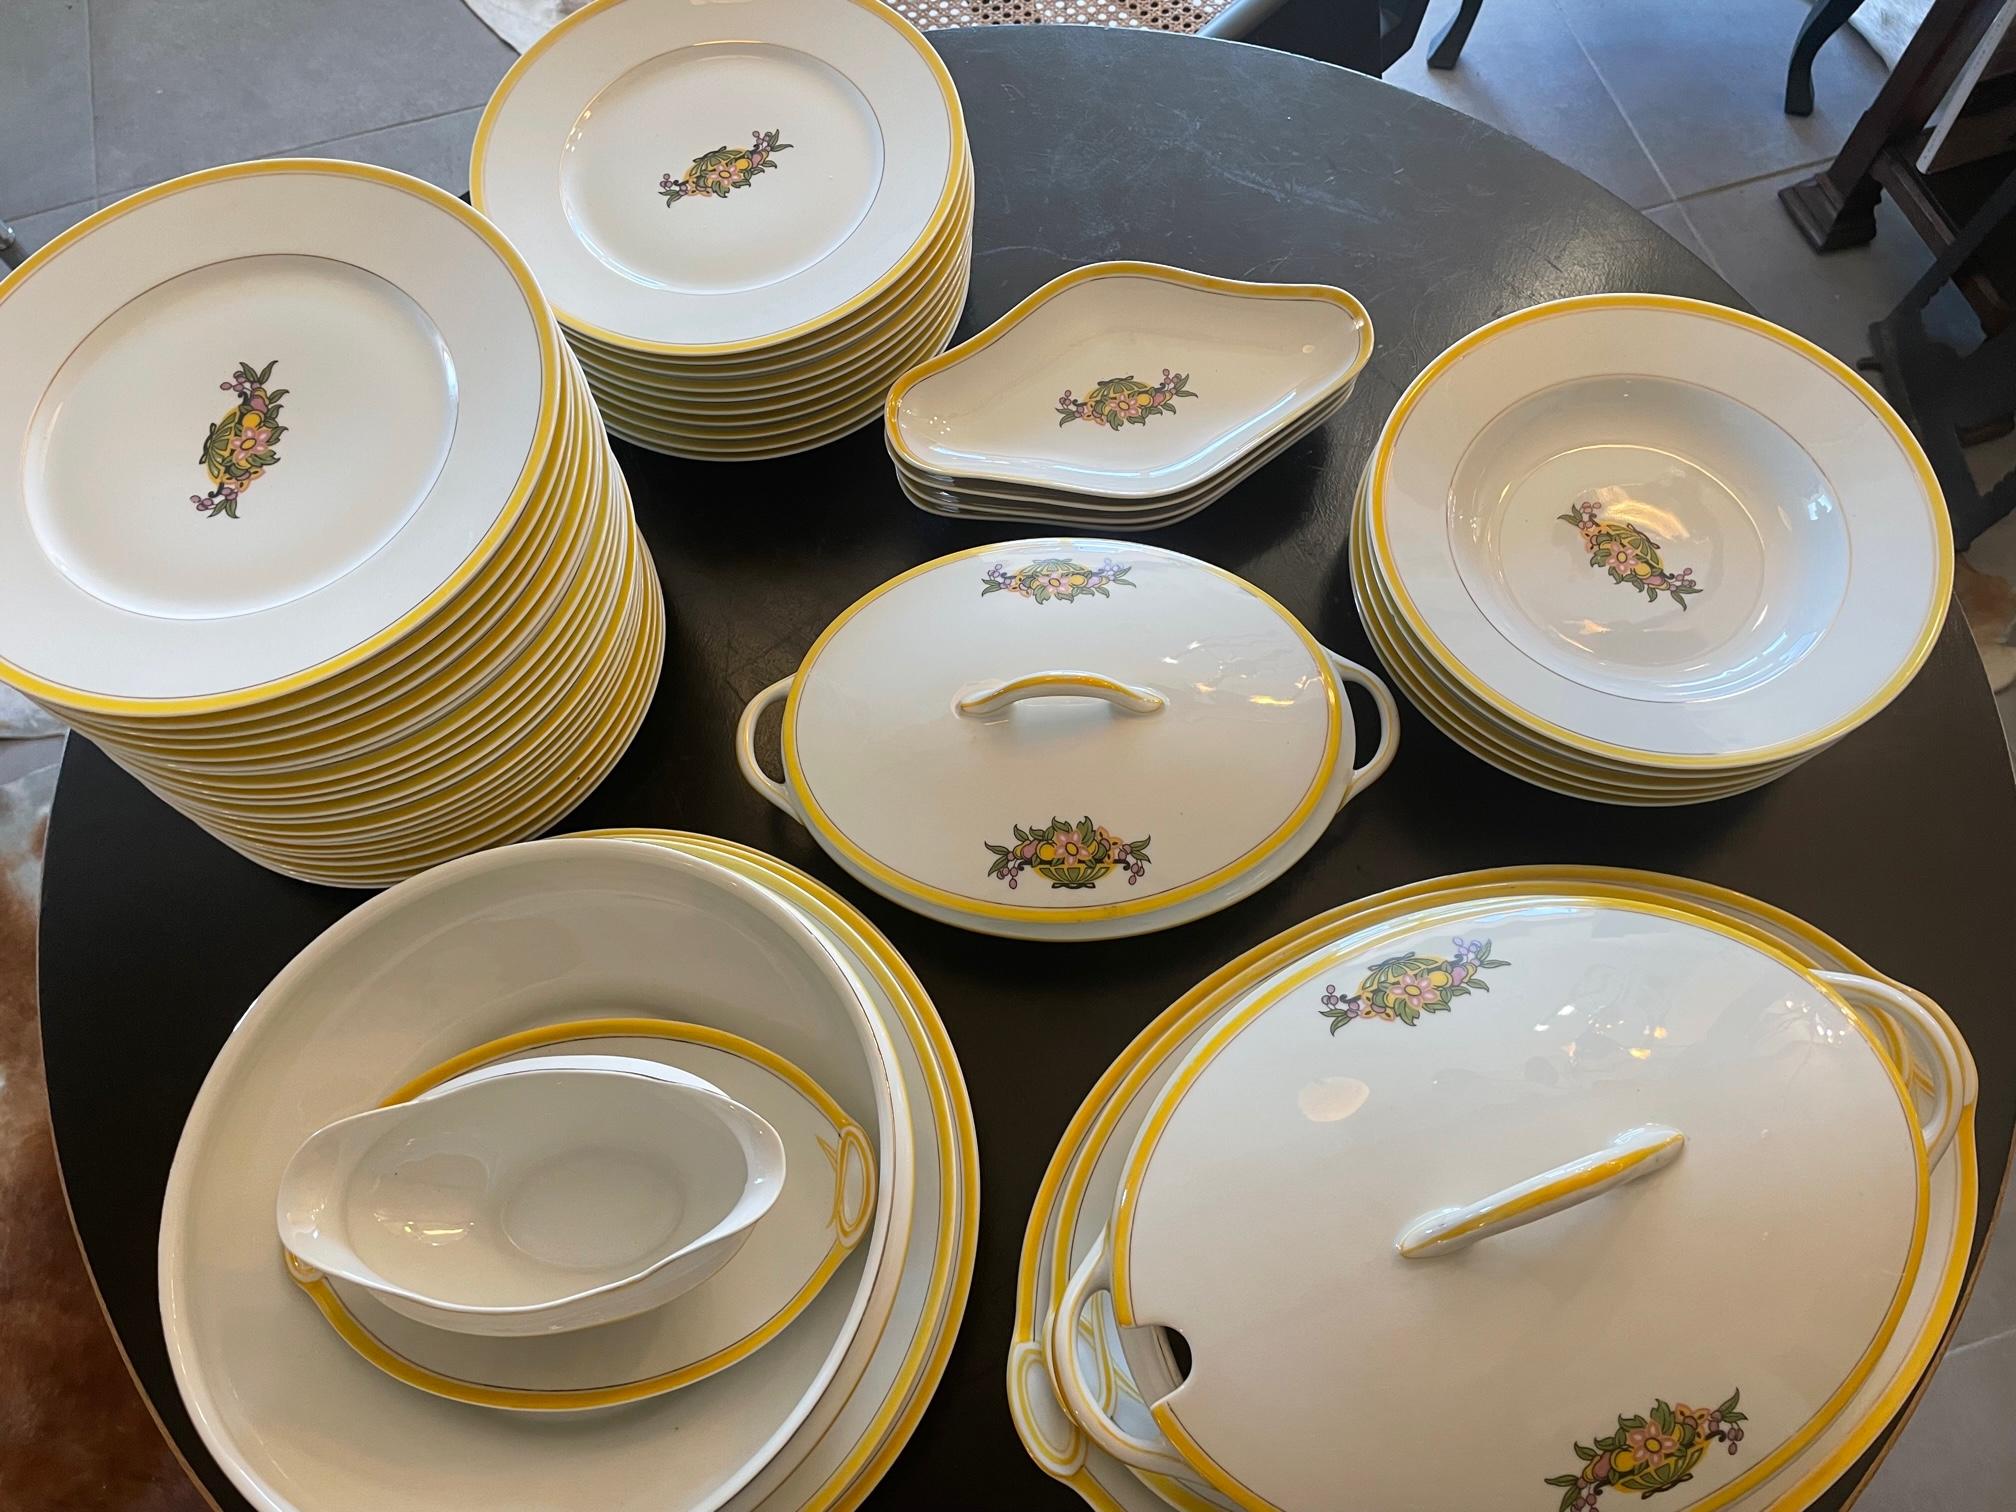 Beautiful Art deco Limoges porcelain dinner service with a yellow border and flower decoration in the middle. 
49 pieces : 
- 31 dinner plates 25 cm
- 4 soup plates 25 cm 
- 2 lidded tureens W35cmXD22cm / W30cmXD18cm 
- 1 salad bowl 26cm 
- 6